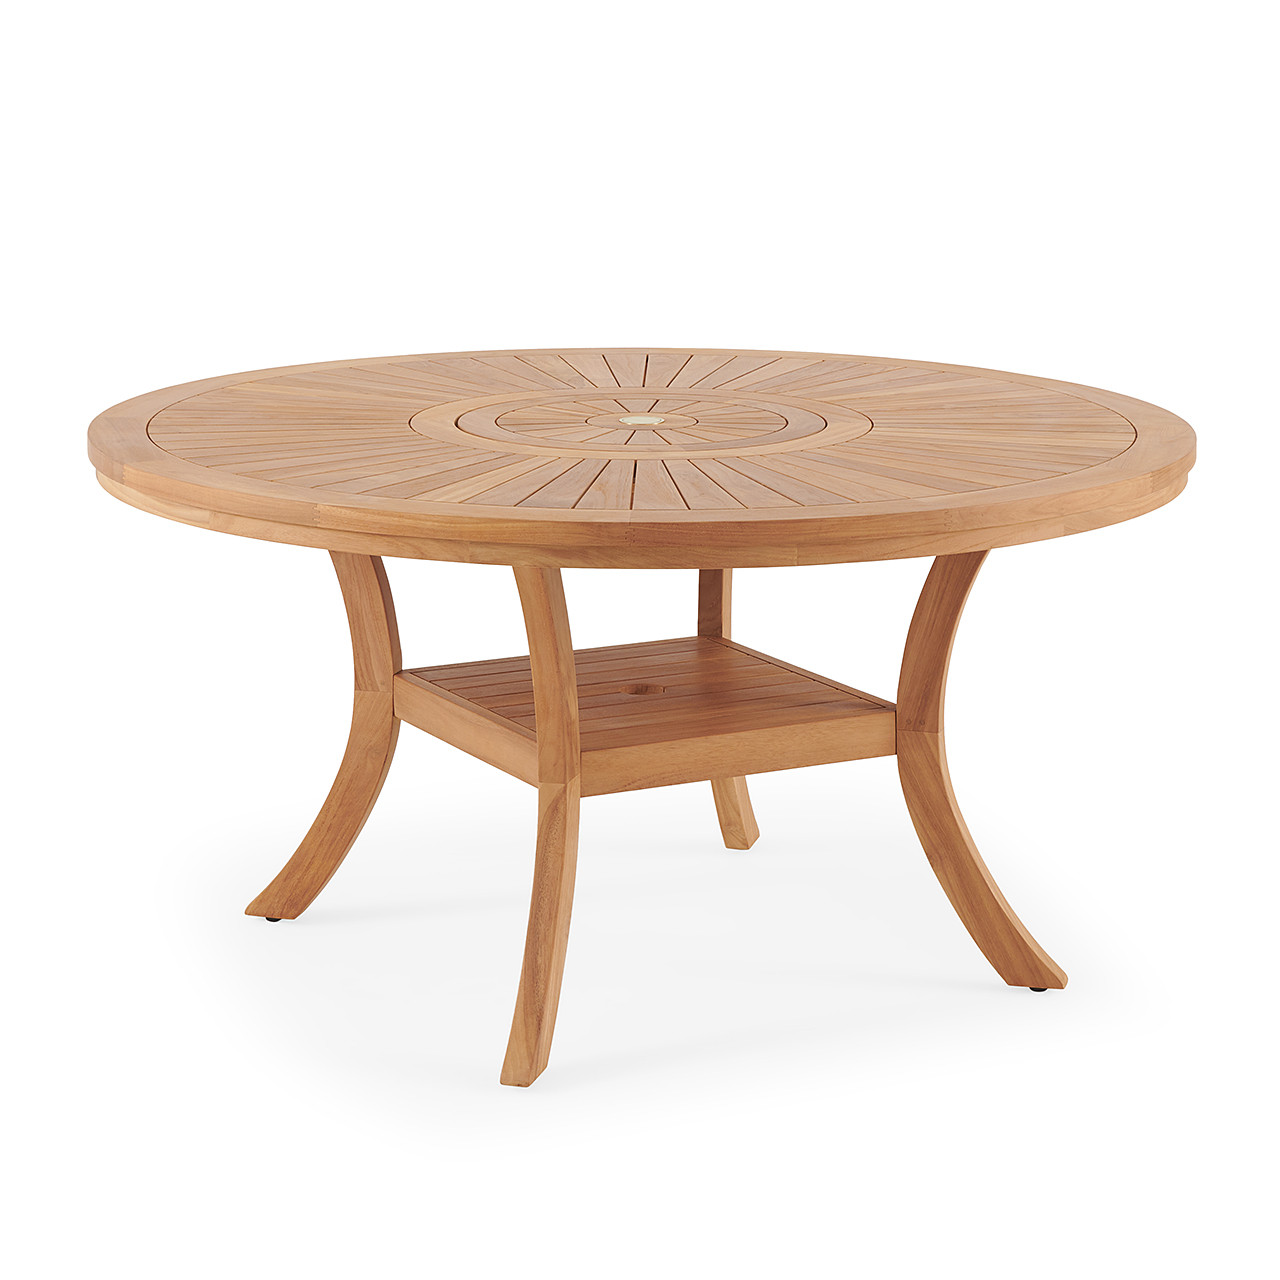 Bristol Teak 59 in. D Table with Lazy Susan